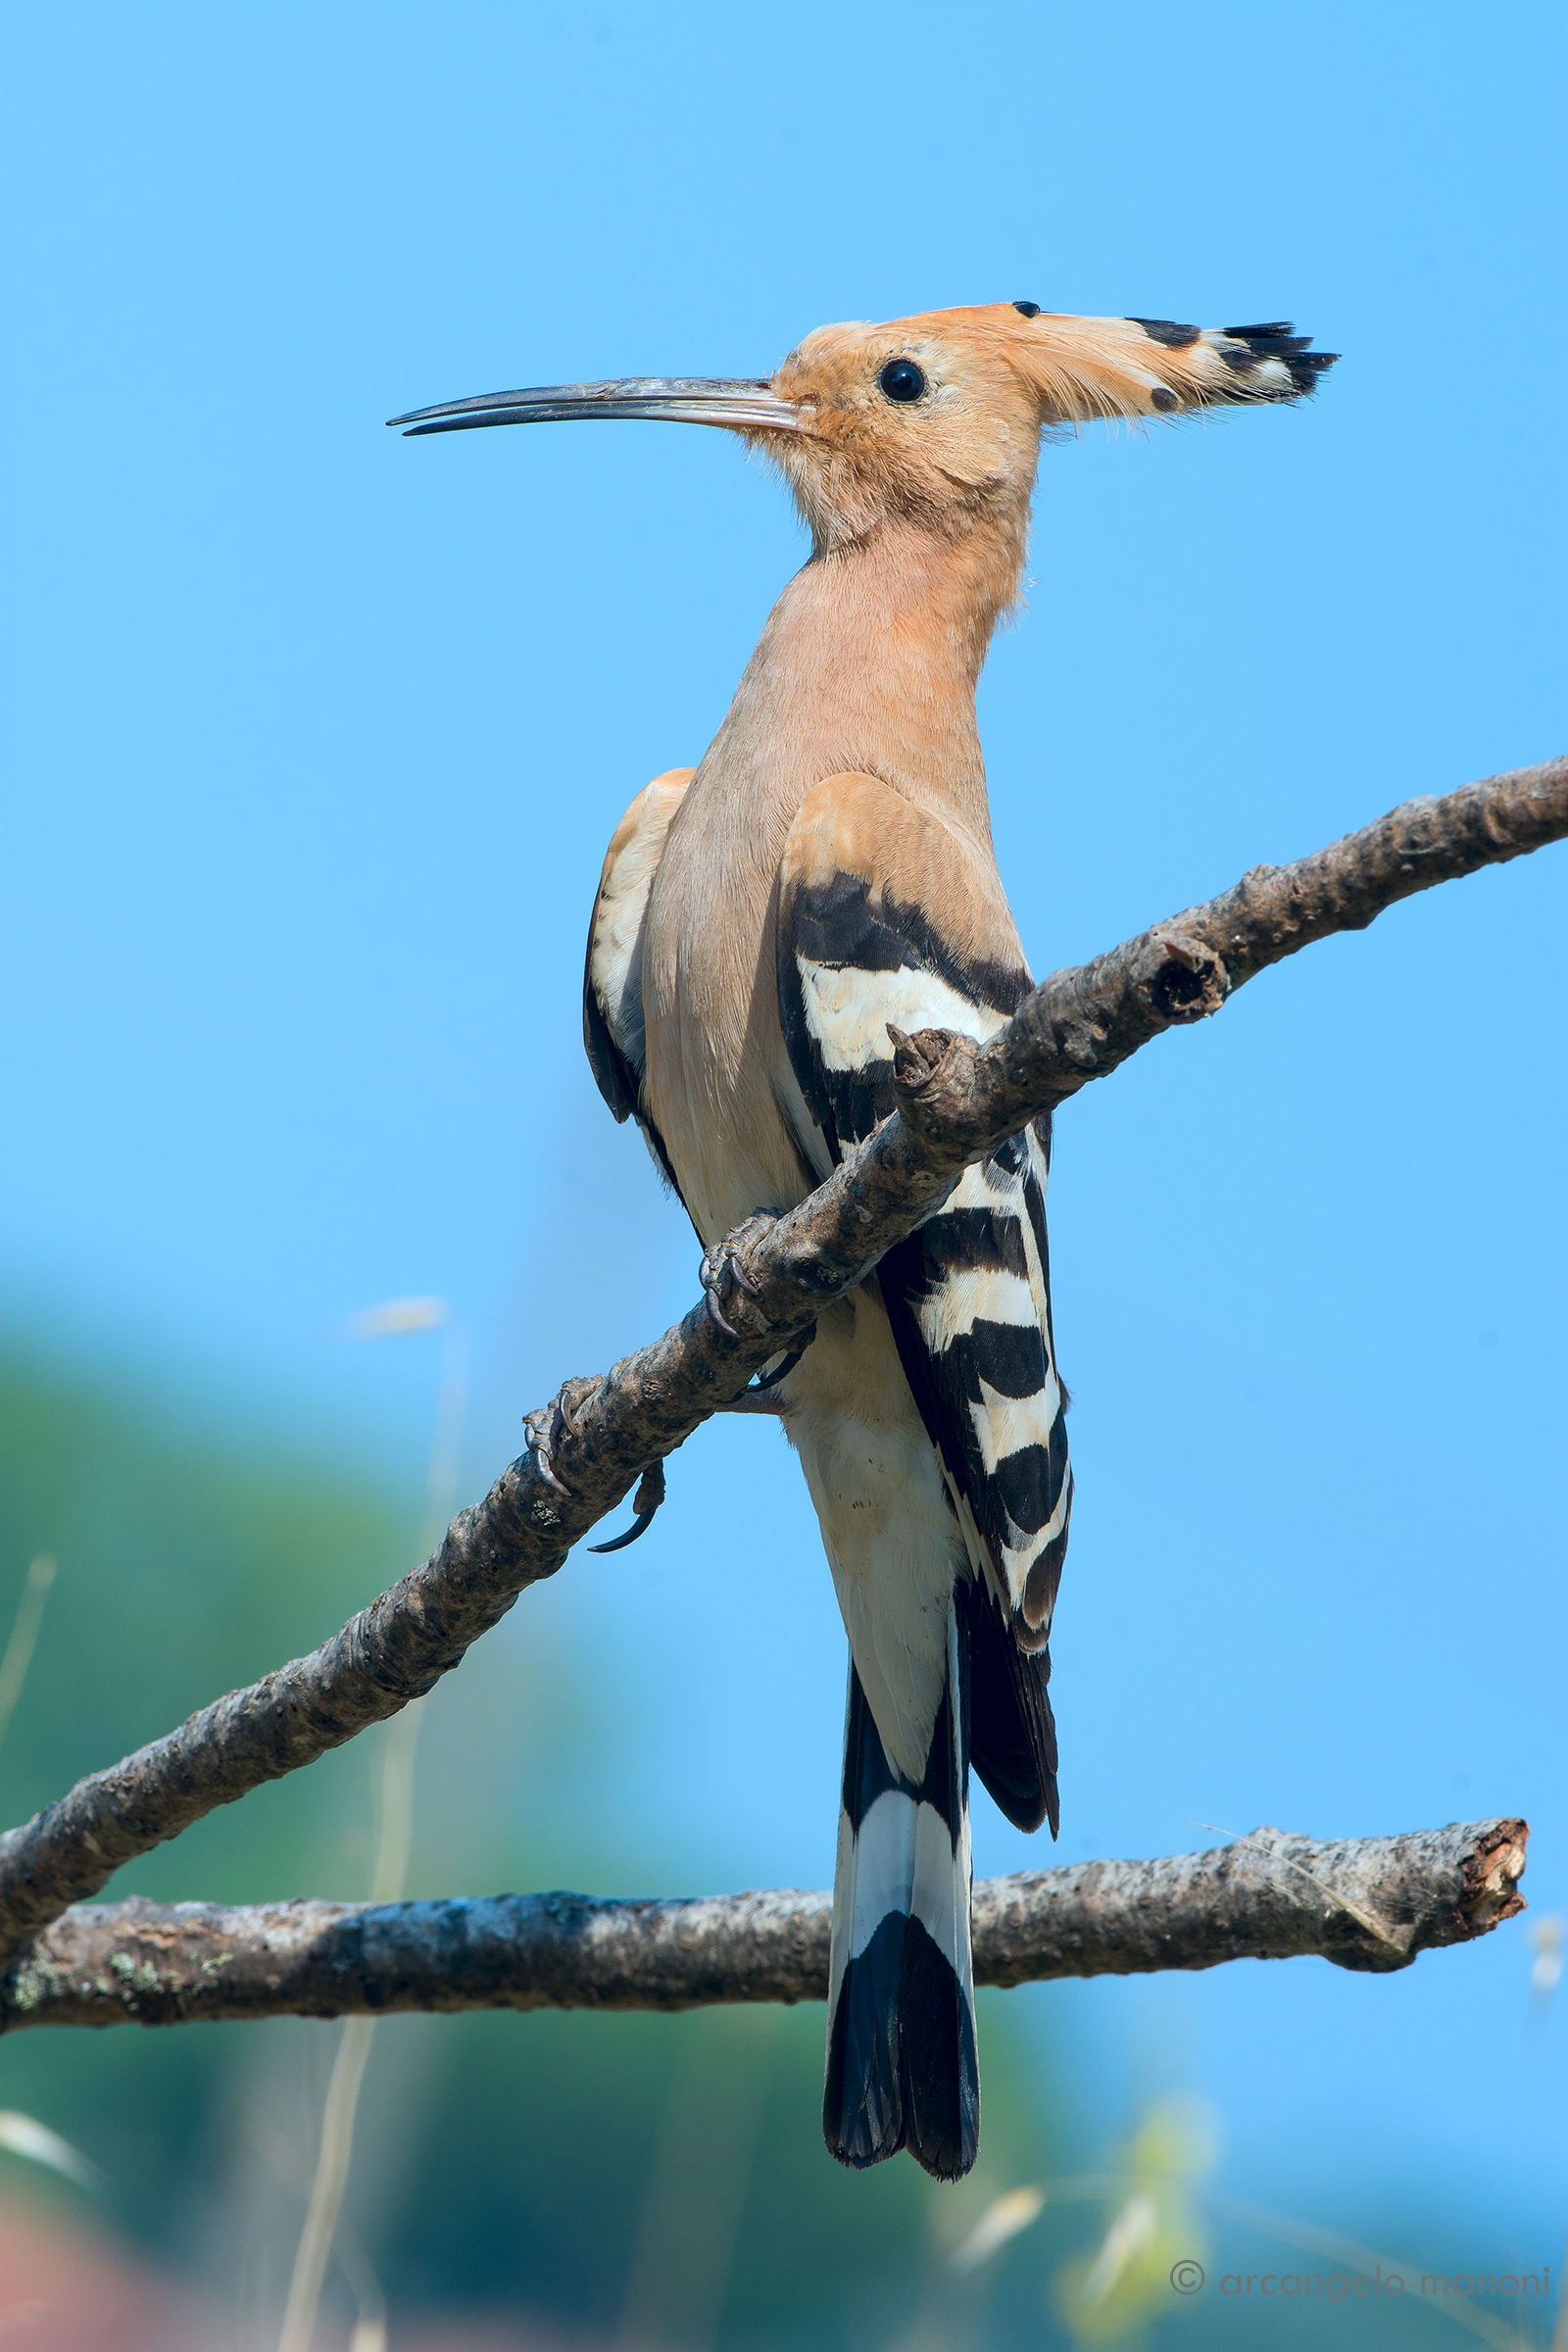 A hoopoe attention...